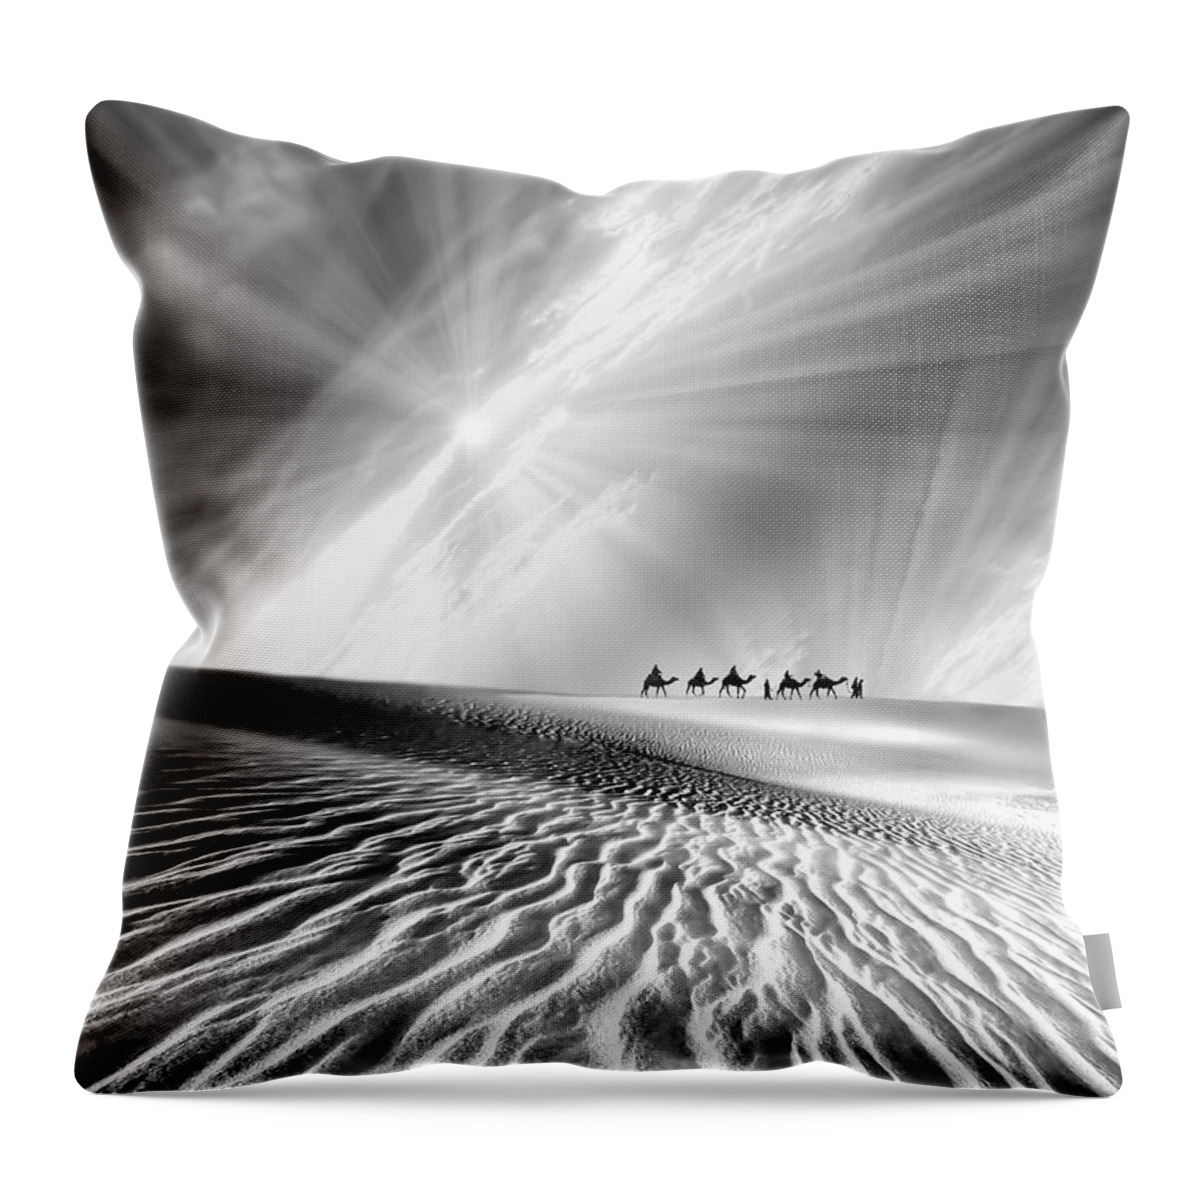 Fine Art Throw Pillow featuring the digital art Journey II by Sofie Conte